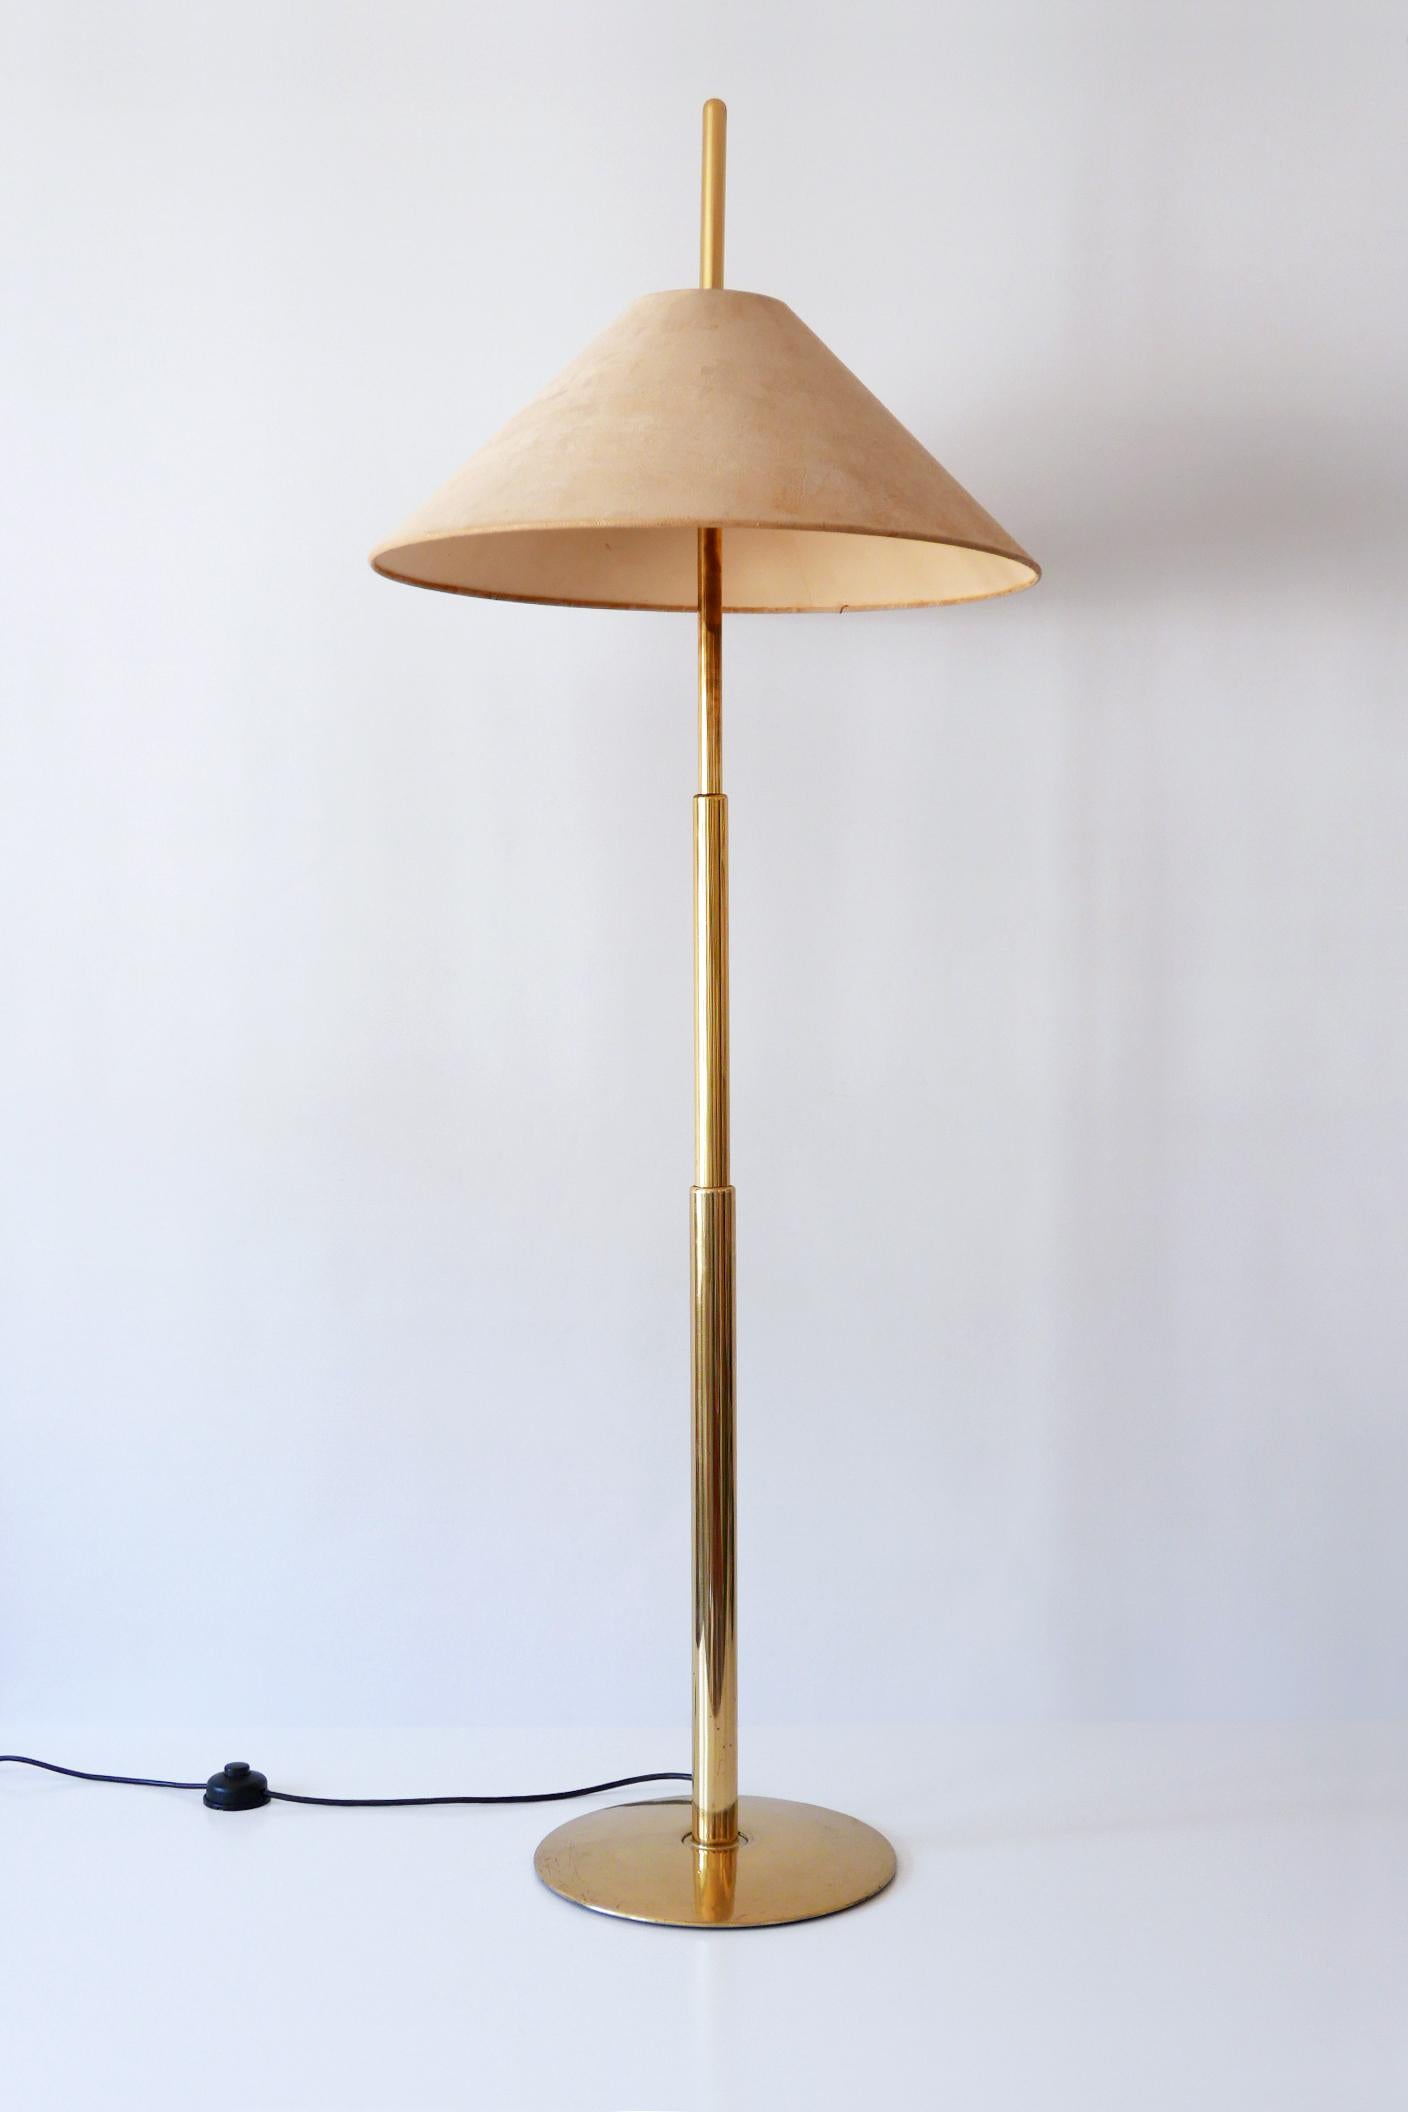 Extremely Rare Telescopic Brass Floor Lamp by Ingo Maurer for Design M 1970s 1